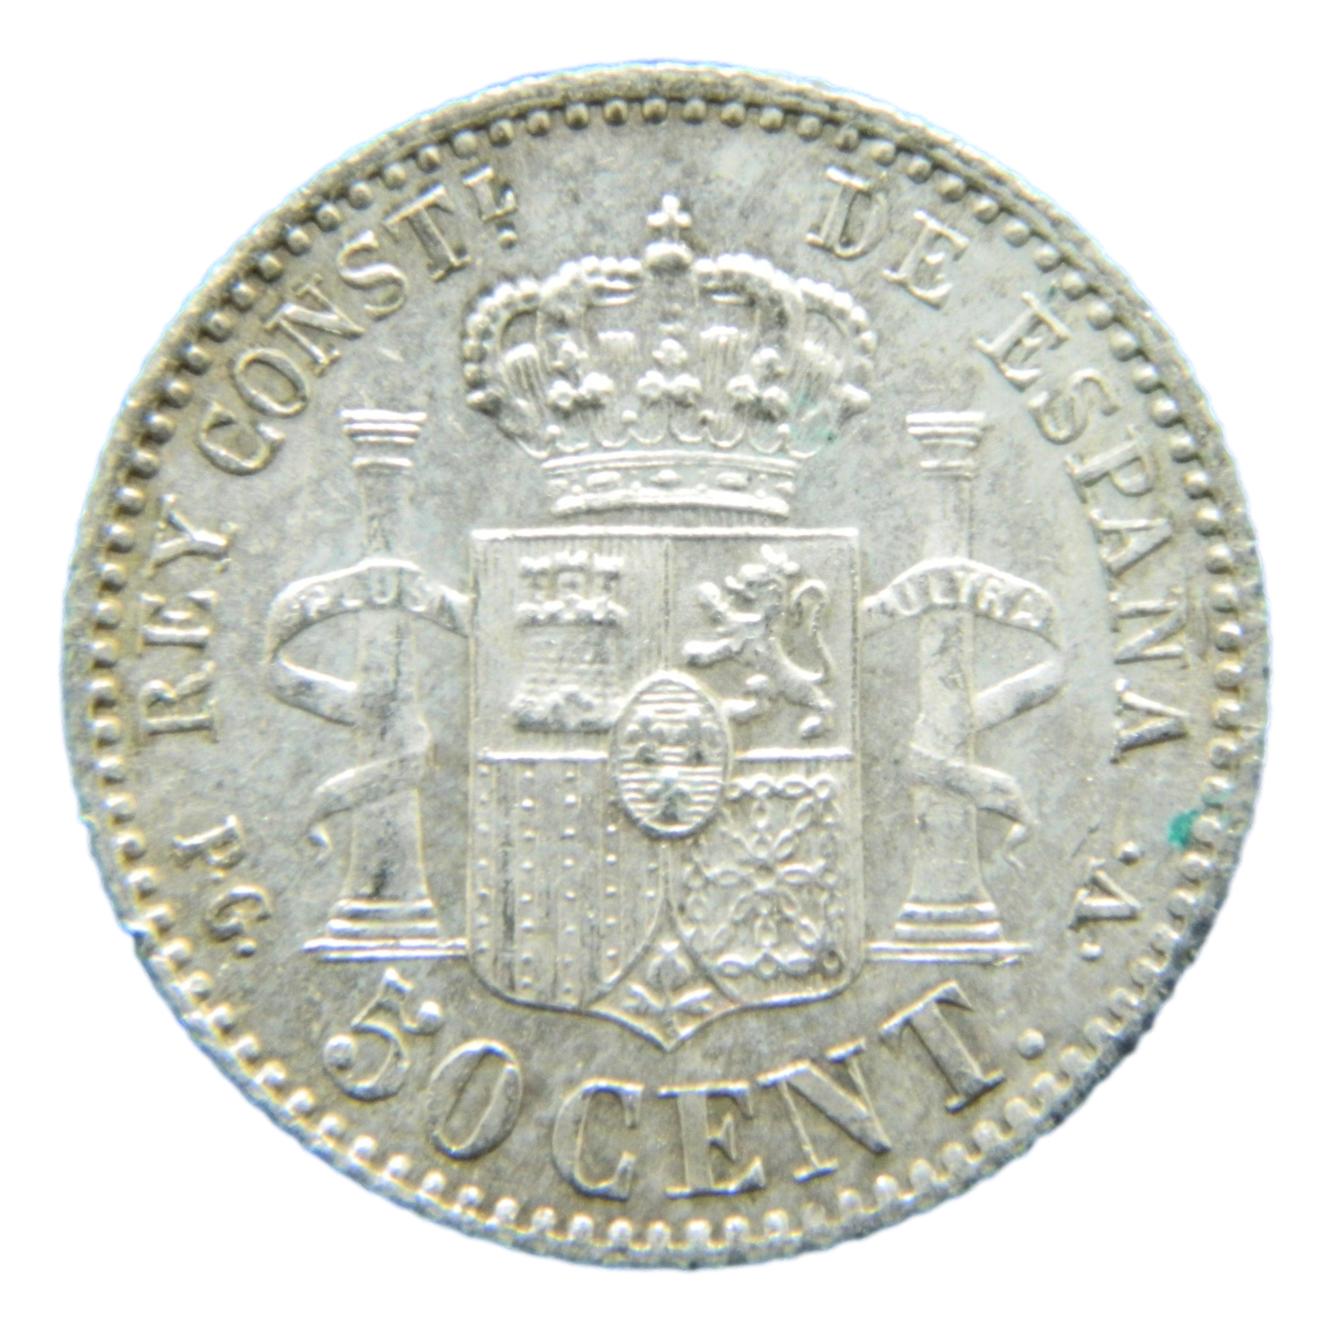 1894 *0-4 - ALFONSO XIII - 50 CENTIMOS - PLATA - S6